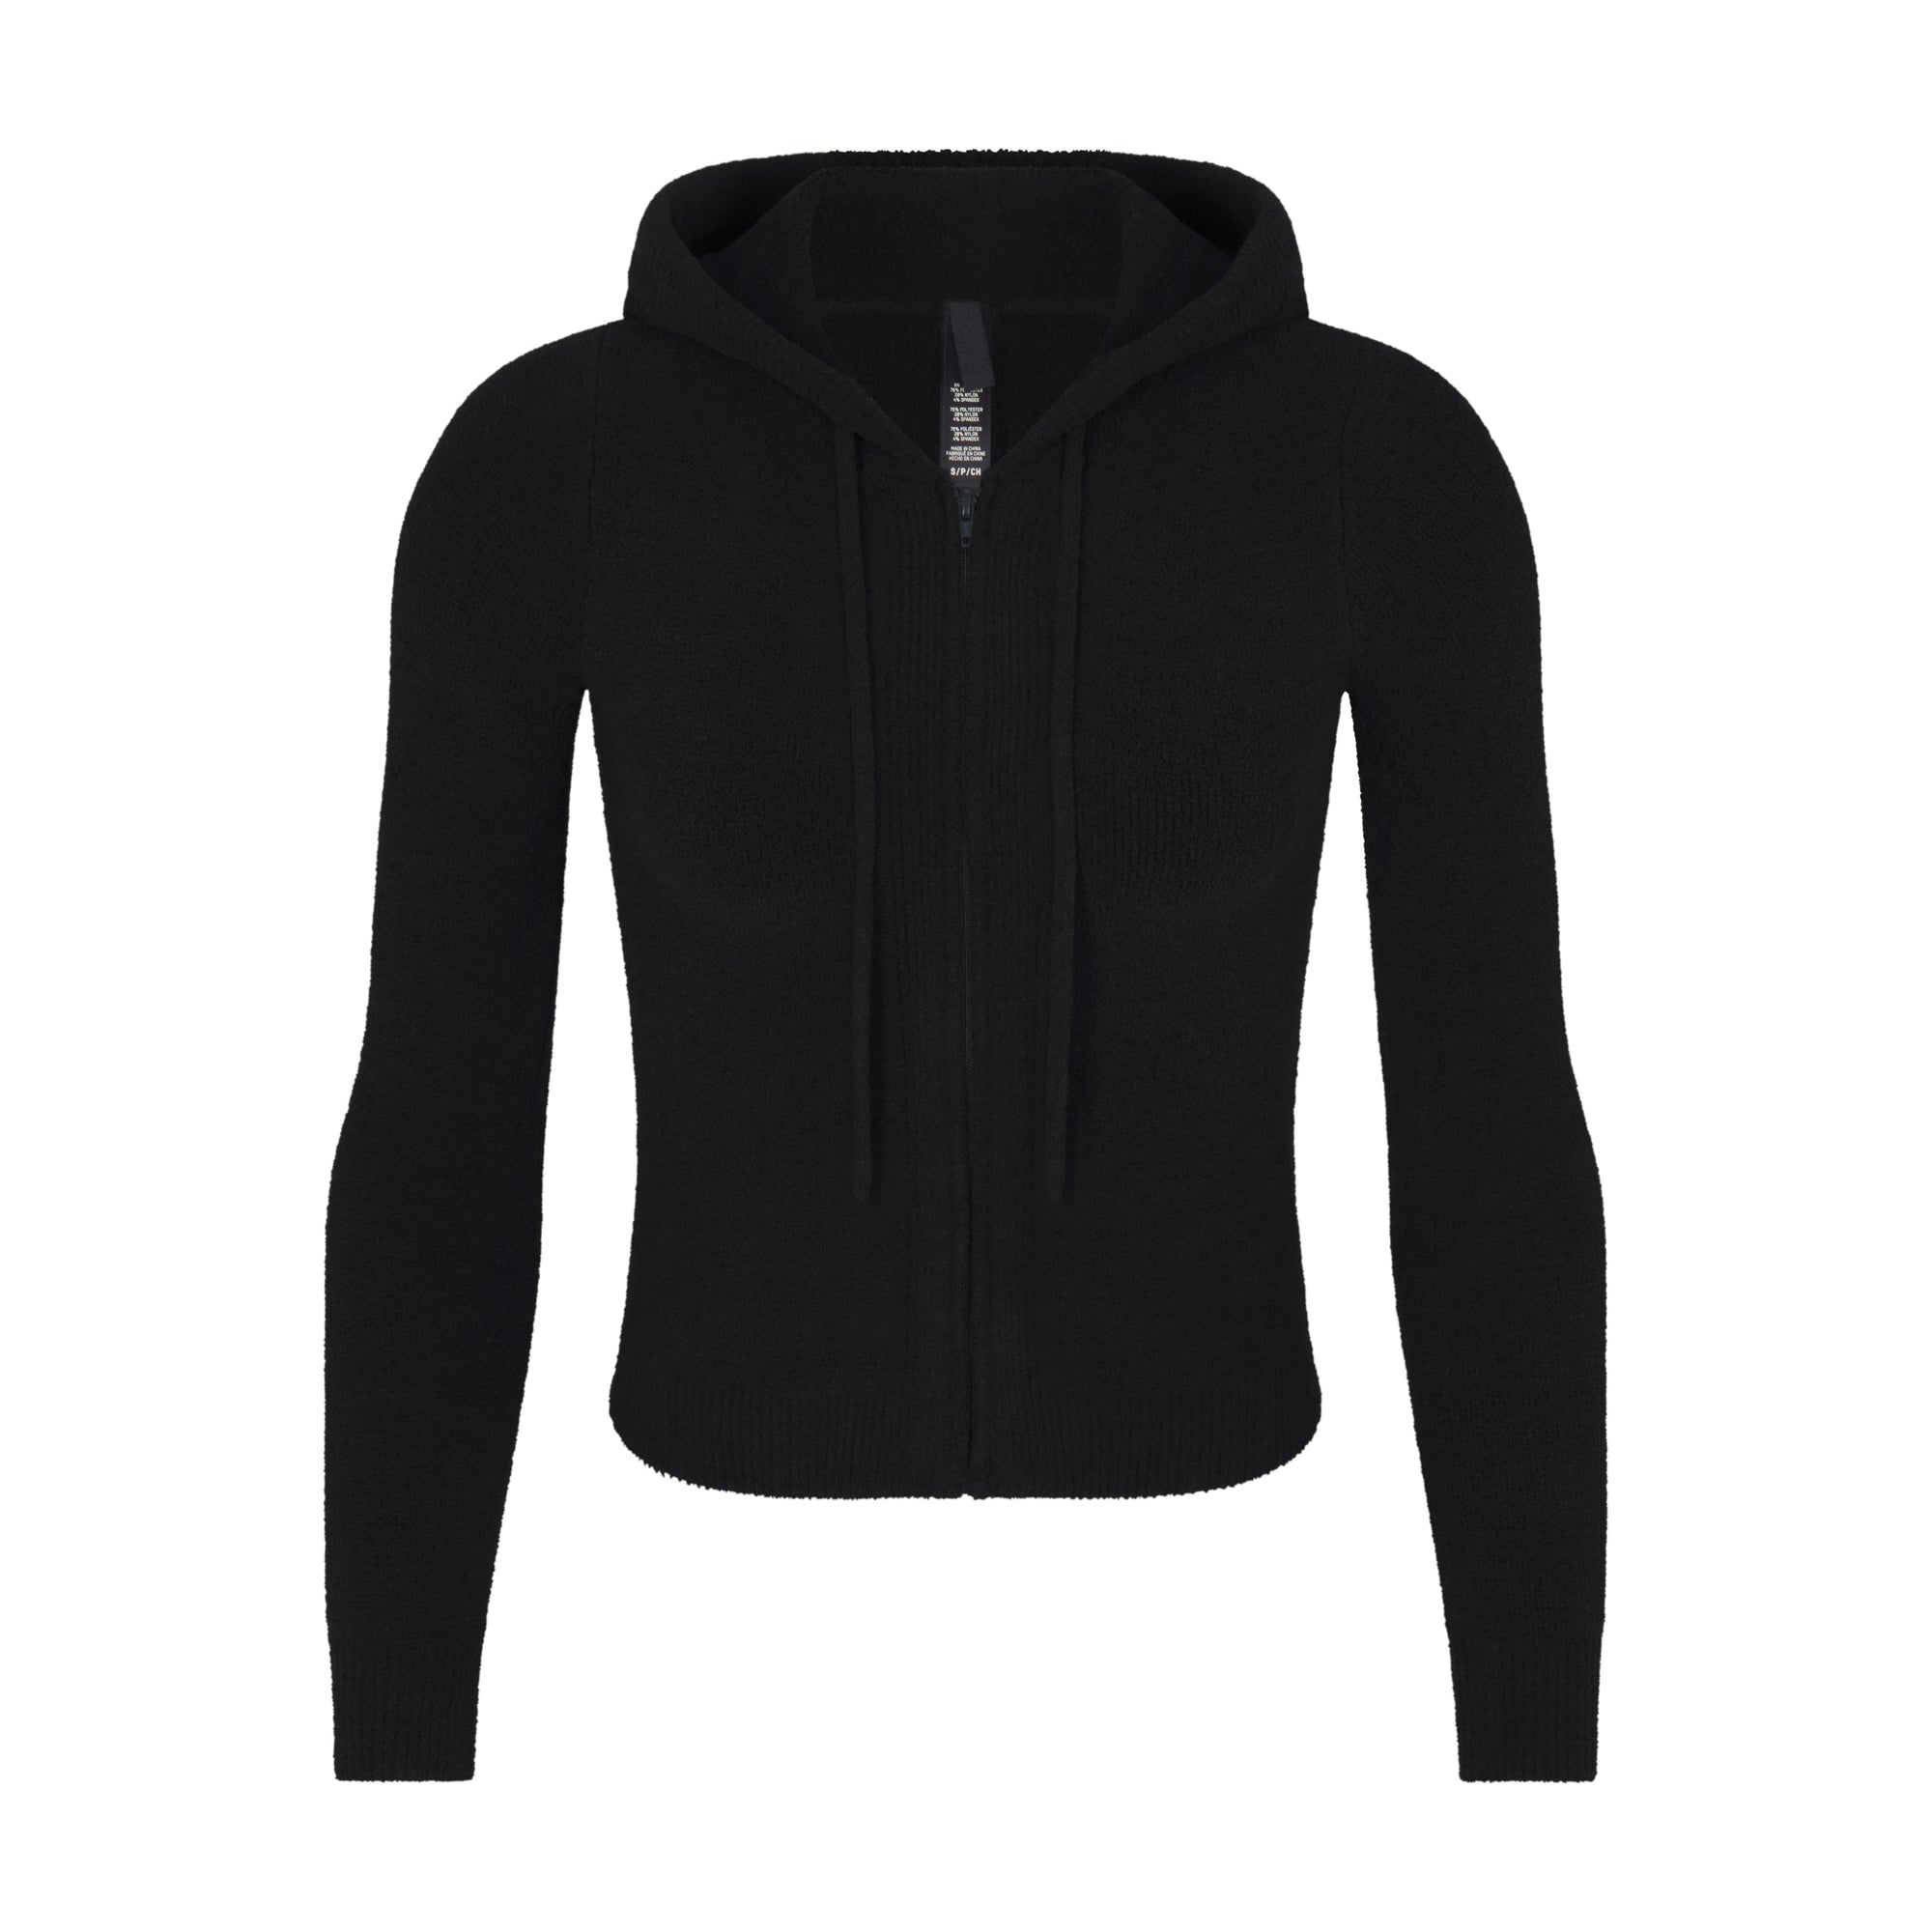 LIGHT COZY CROPPED ZIP UP HOODIE | ONYX - LIGHT COZY CROPPED ZIP UP ...